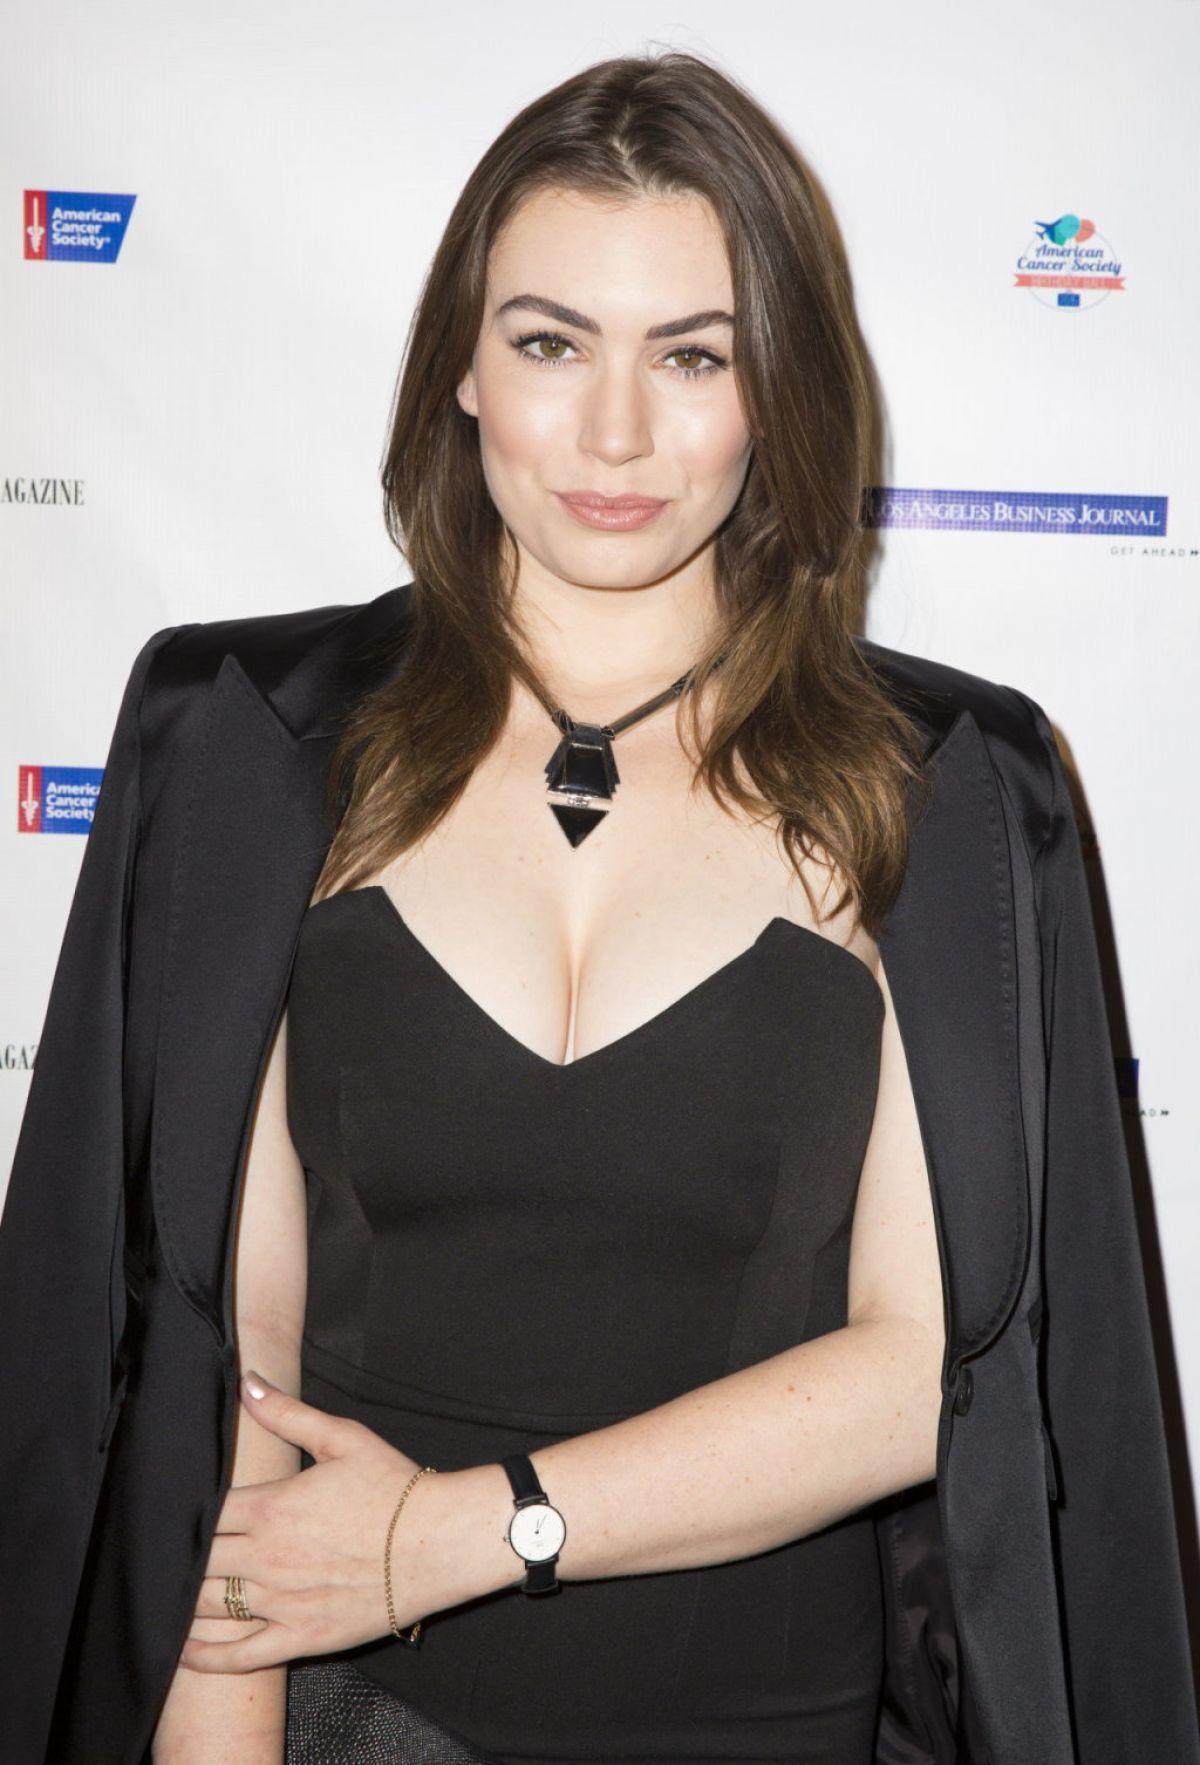 Sophie Simmons Image Search Results. Sophie tweed